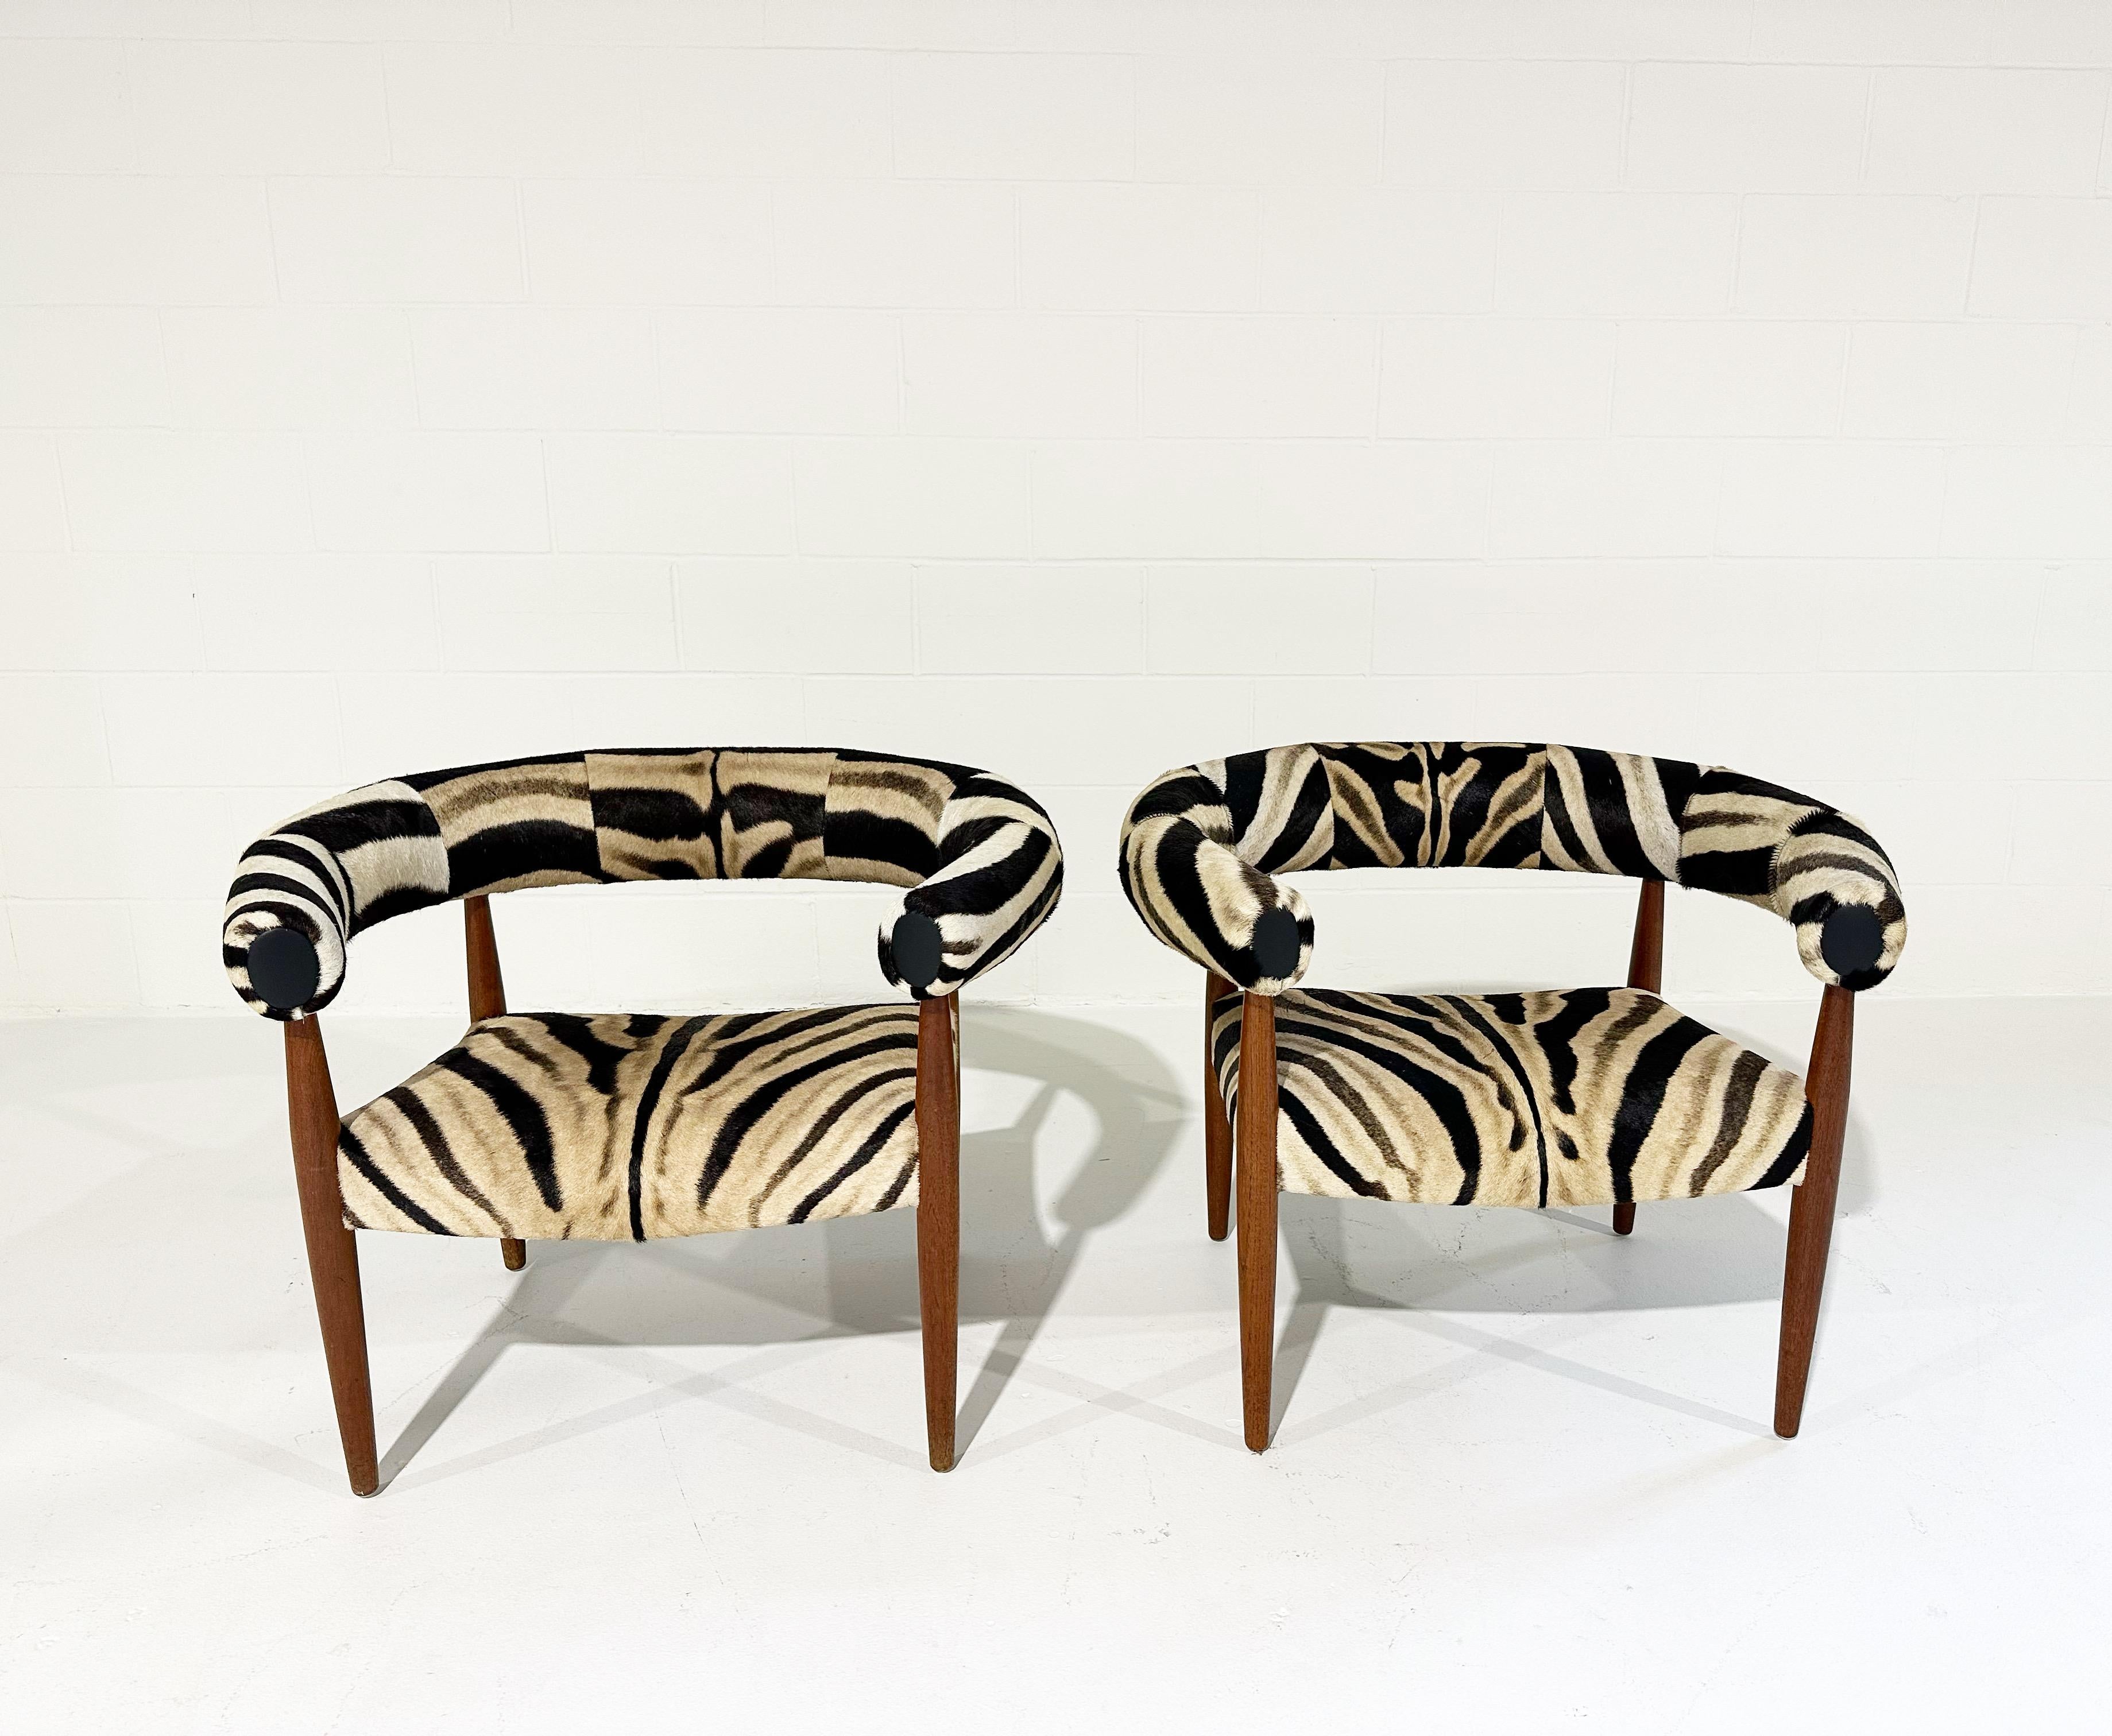 Vintage Nanna and Jorgen Ditzel Ring Lounge Chairs in Zebra Hide 3